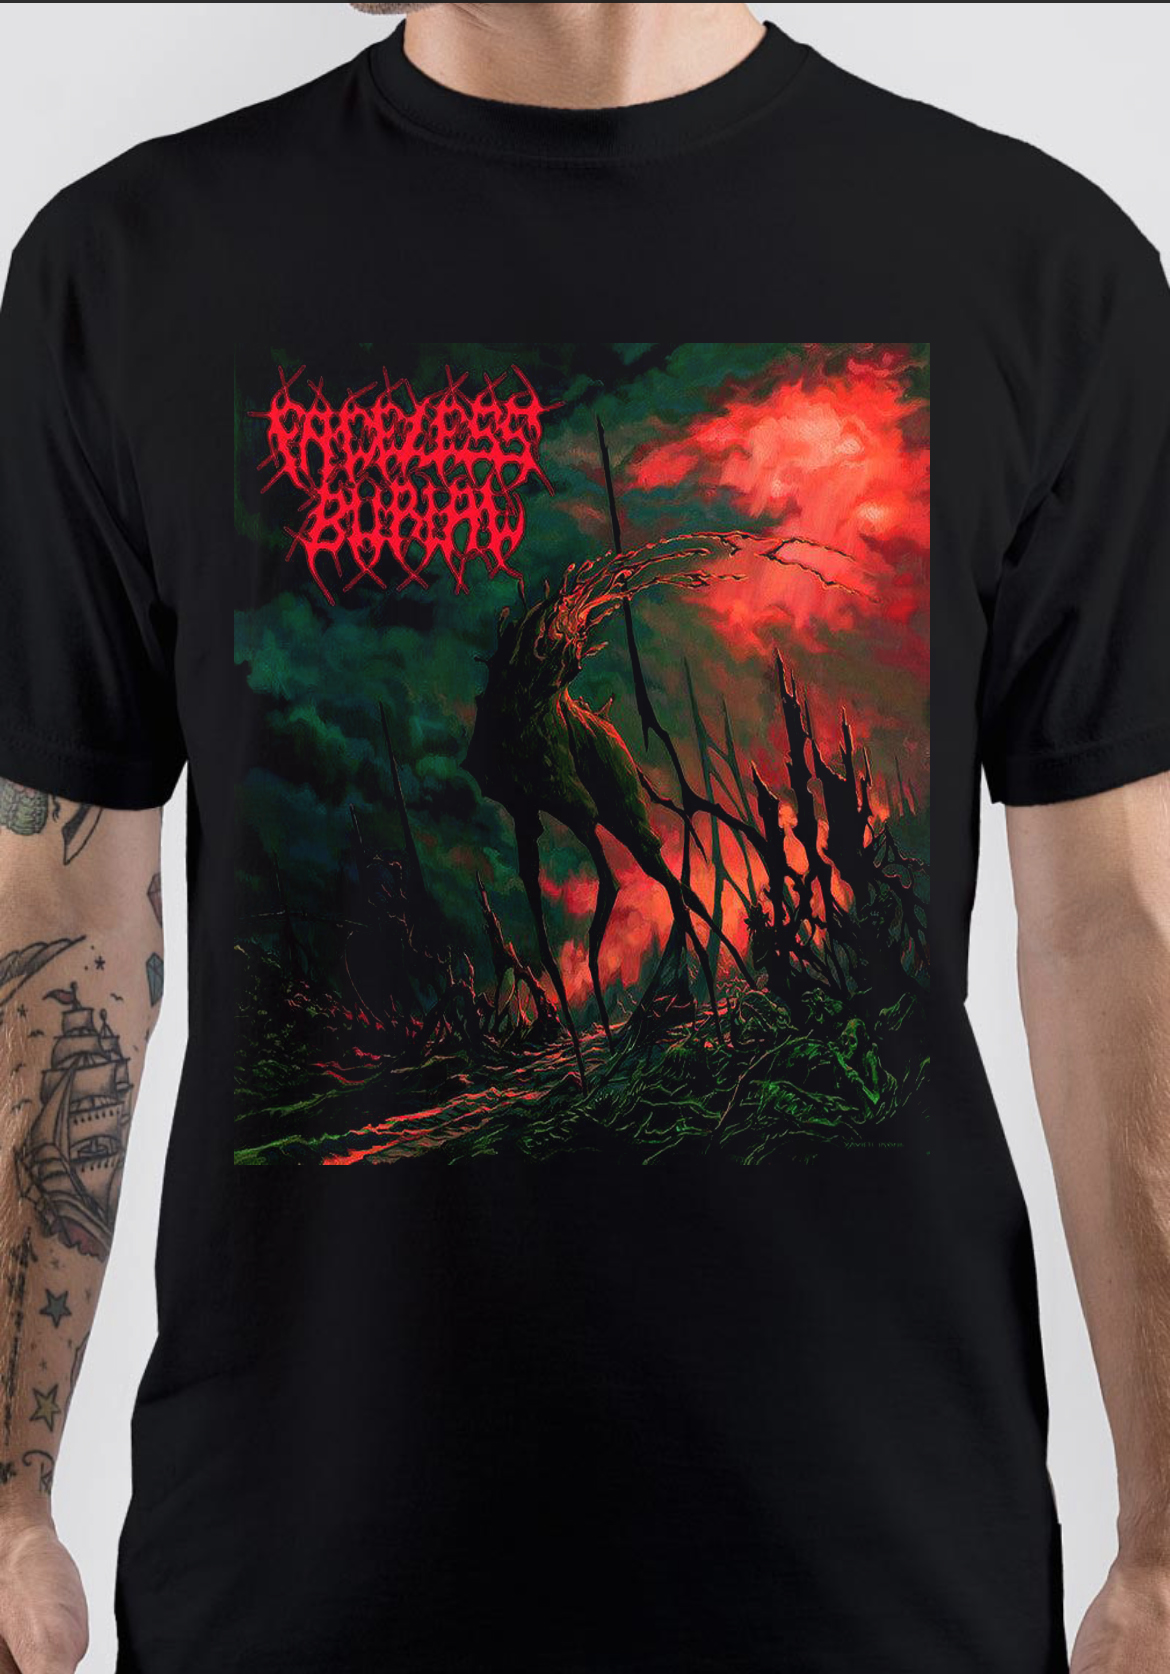 Faceless Burial T-Shirt And Merchandise